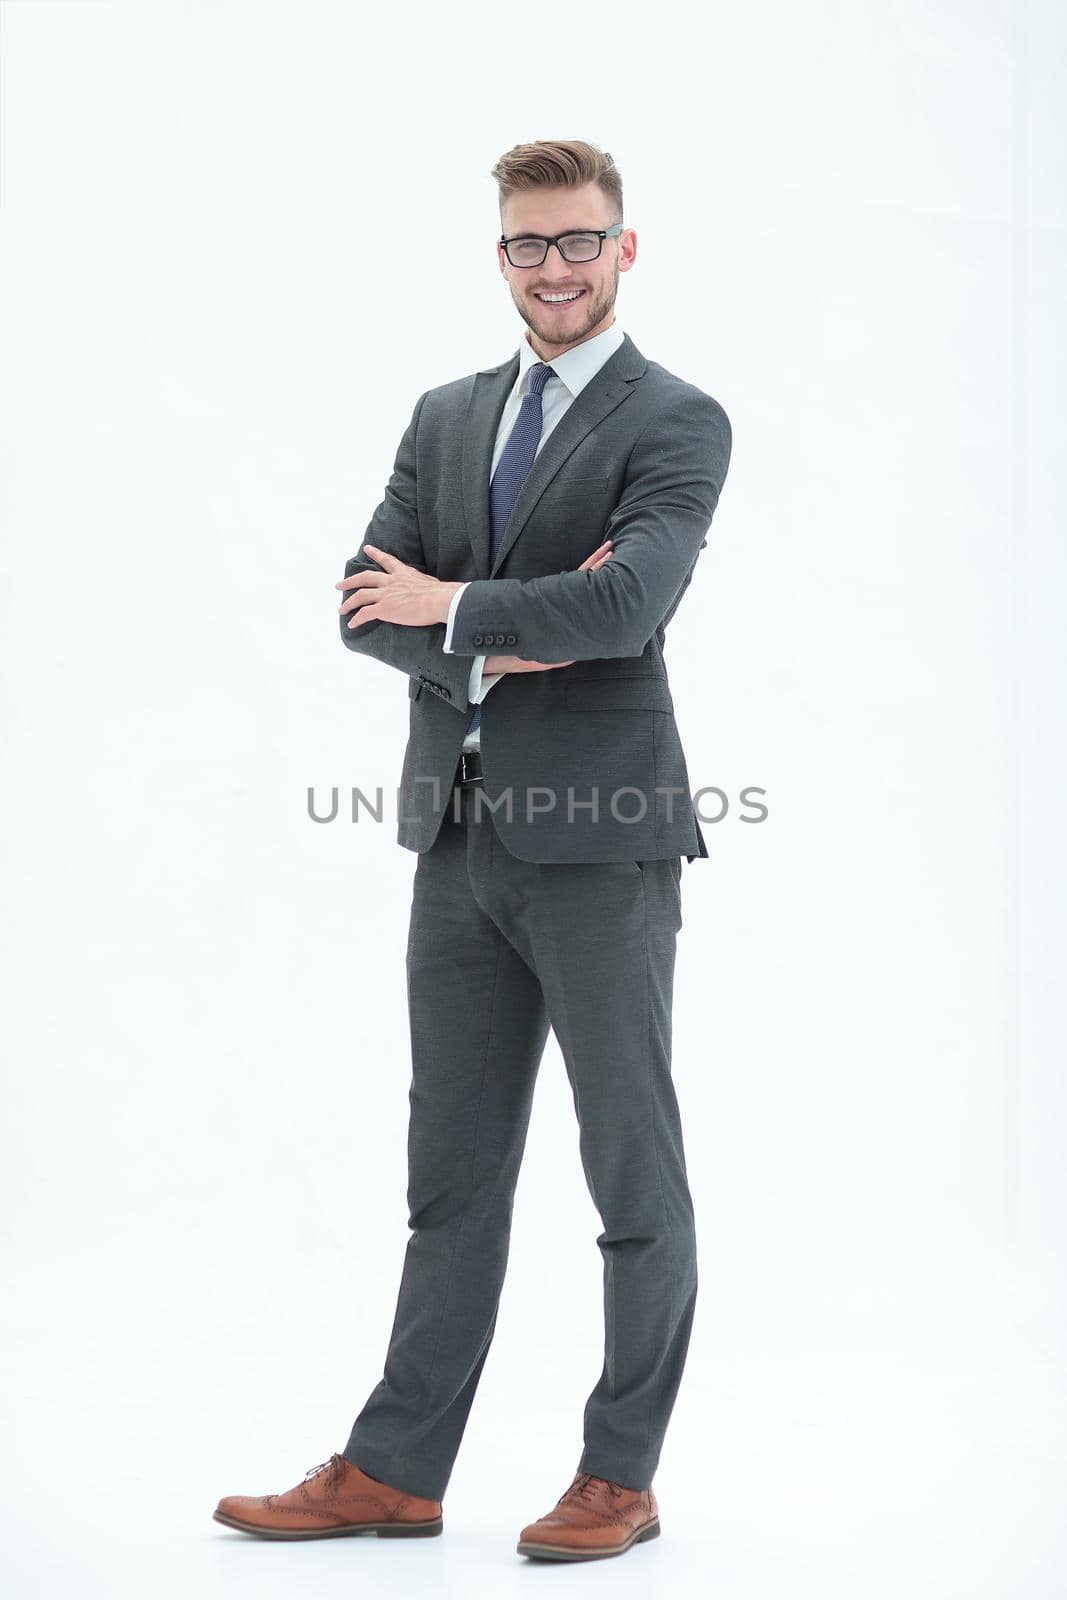 in full growth. portrait of a smiling successful businessman.isolated on white background